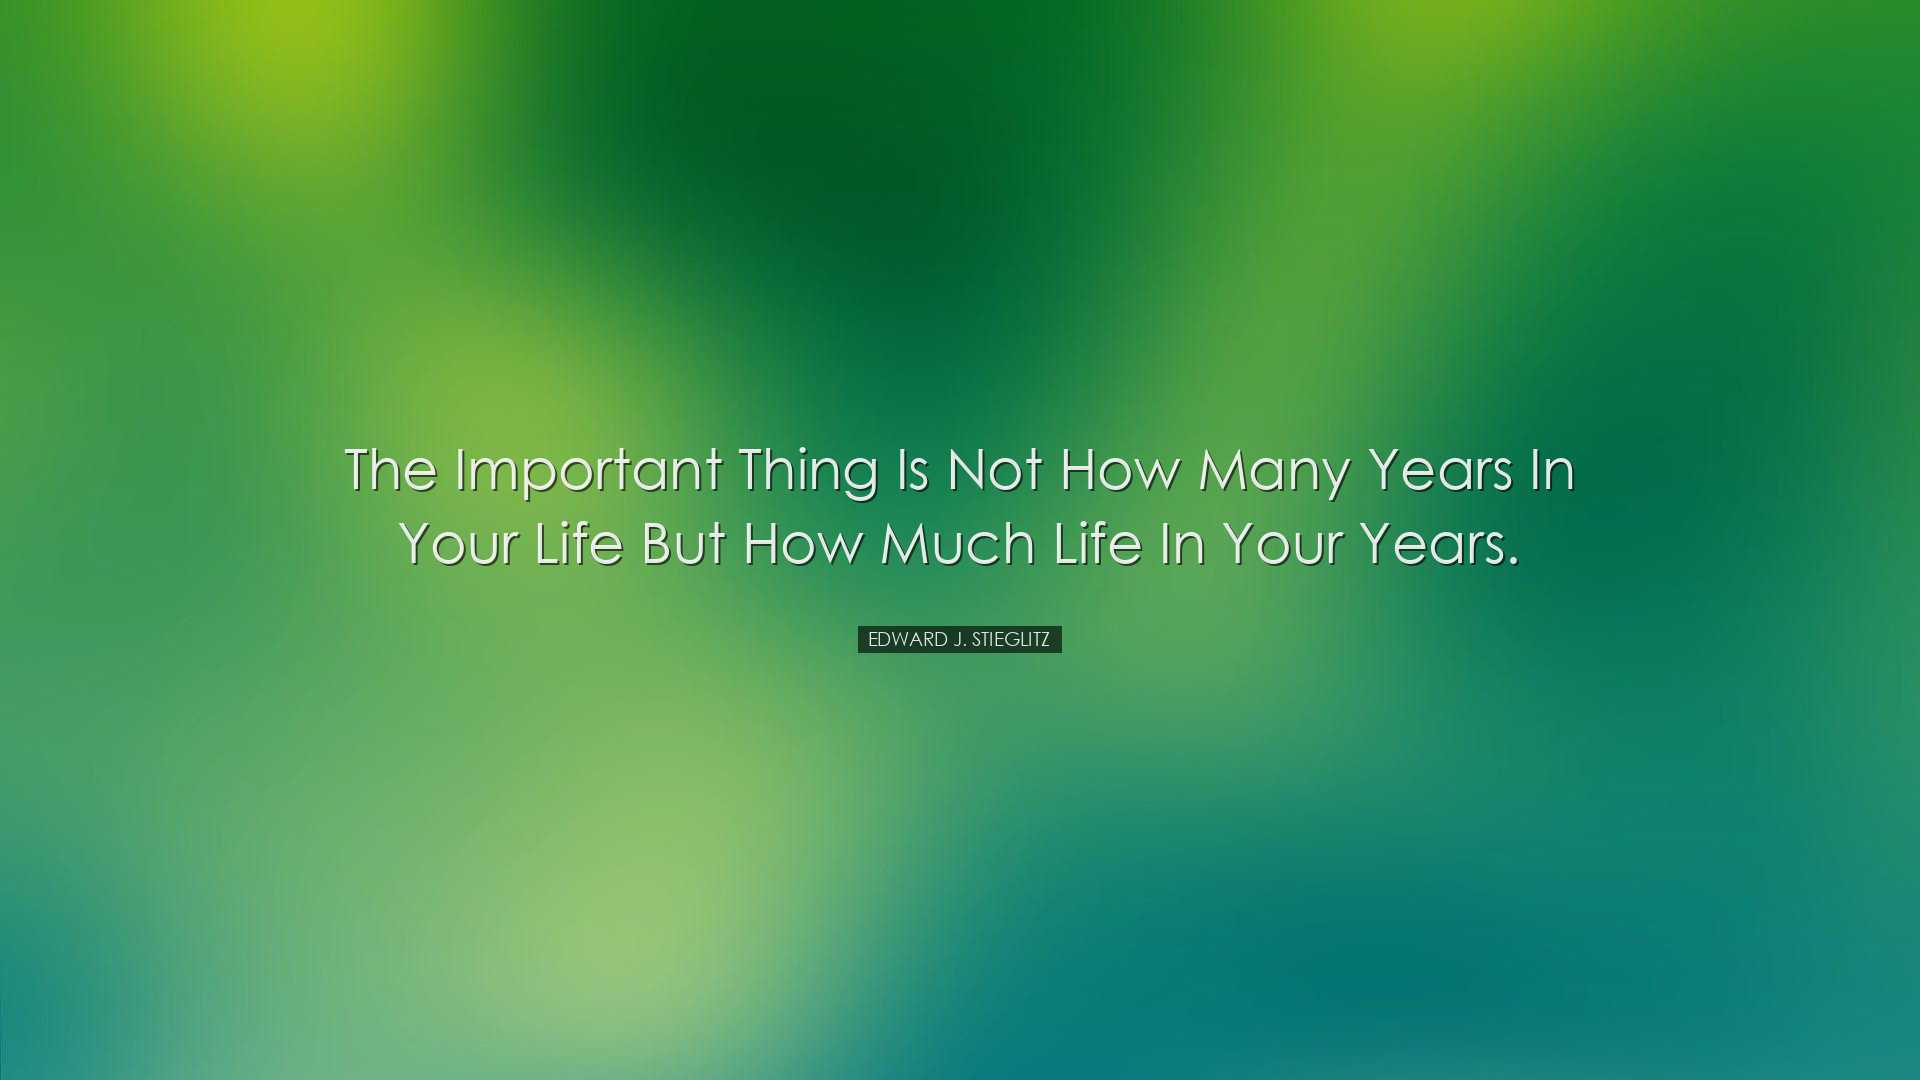 The important thing is not how many years in your life but how muc